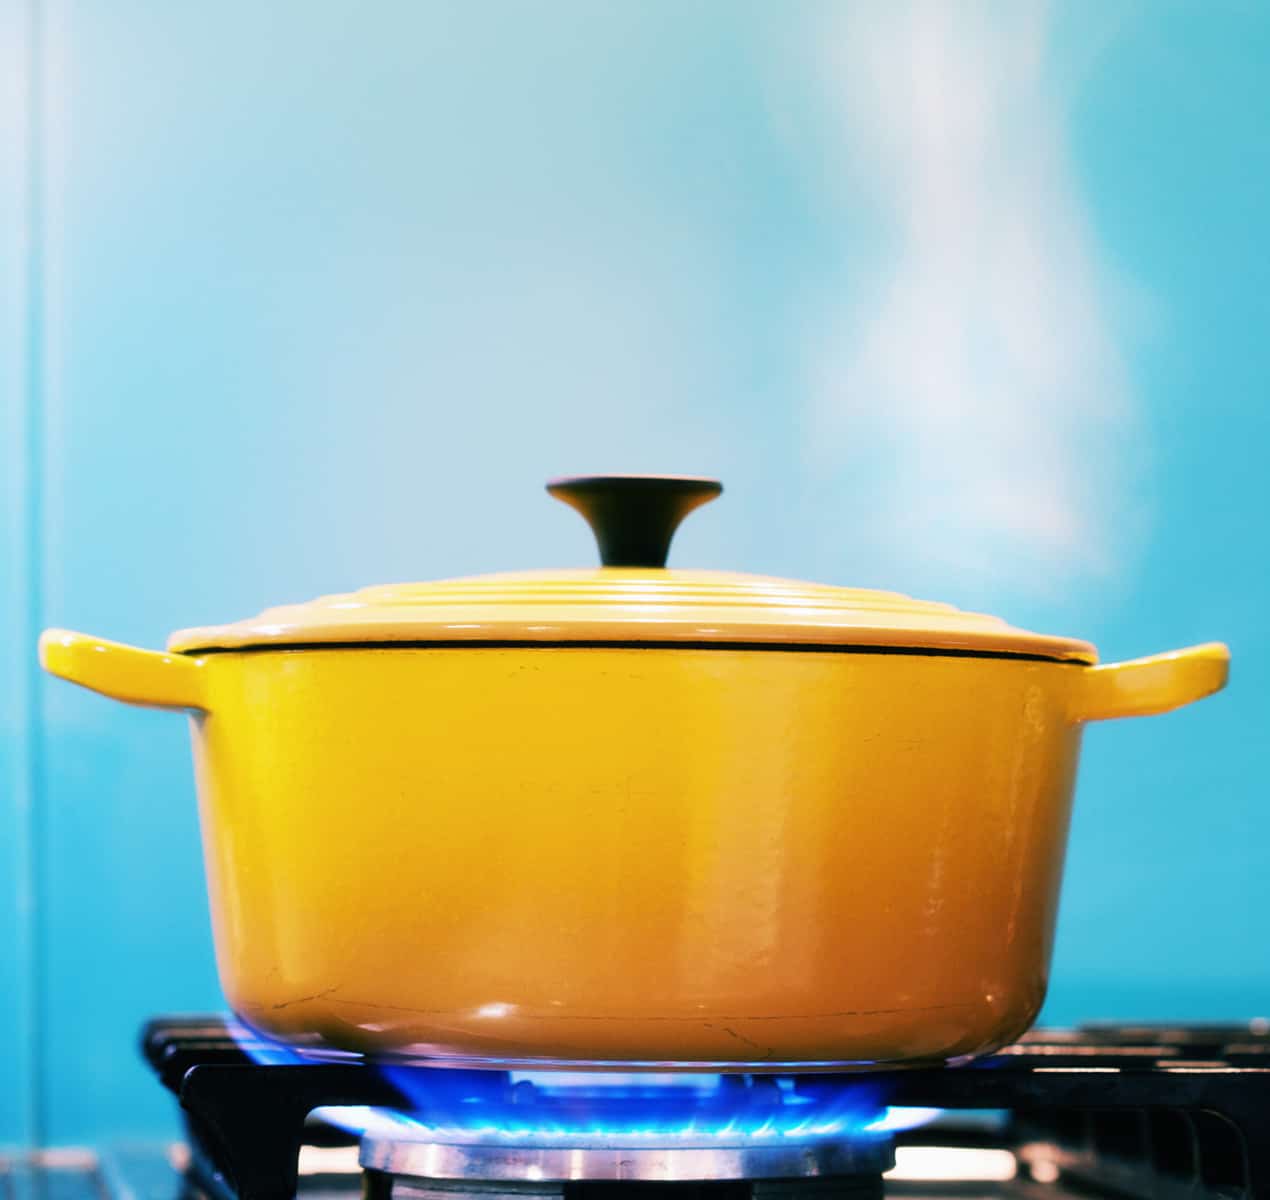 Yellow lidded pot steaming on lit gas stove